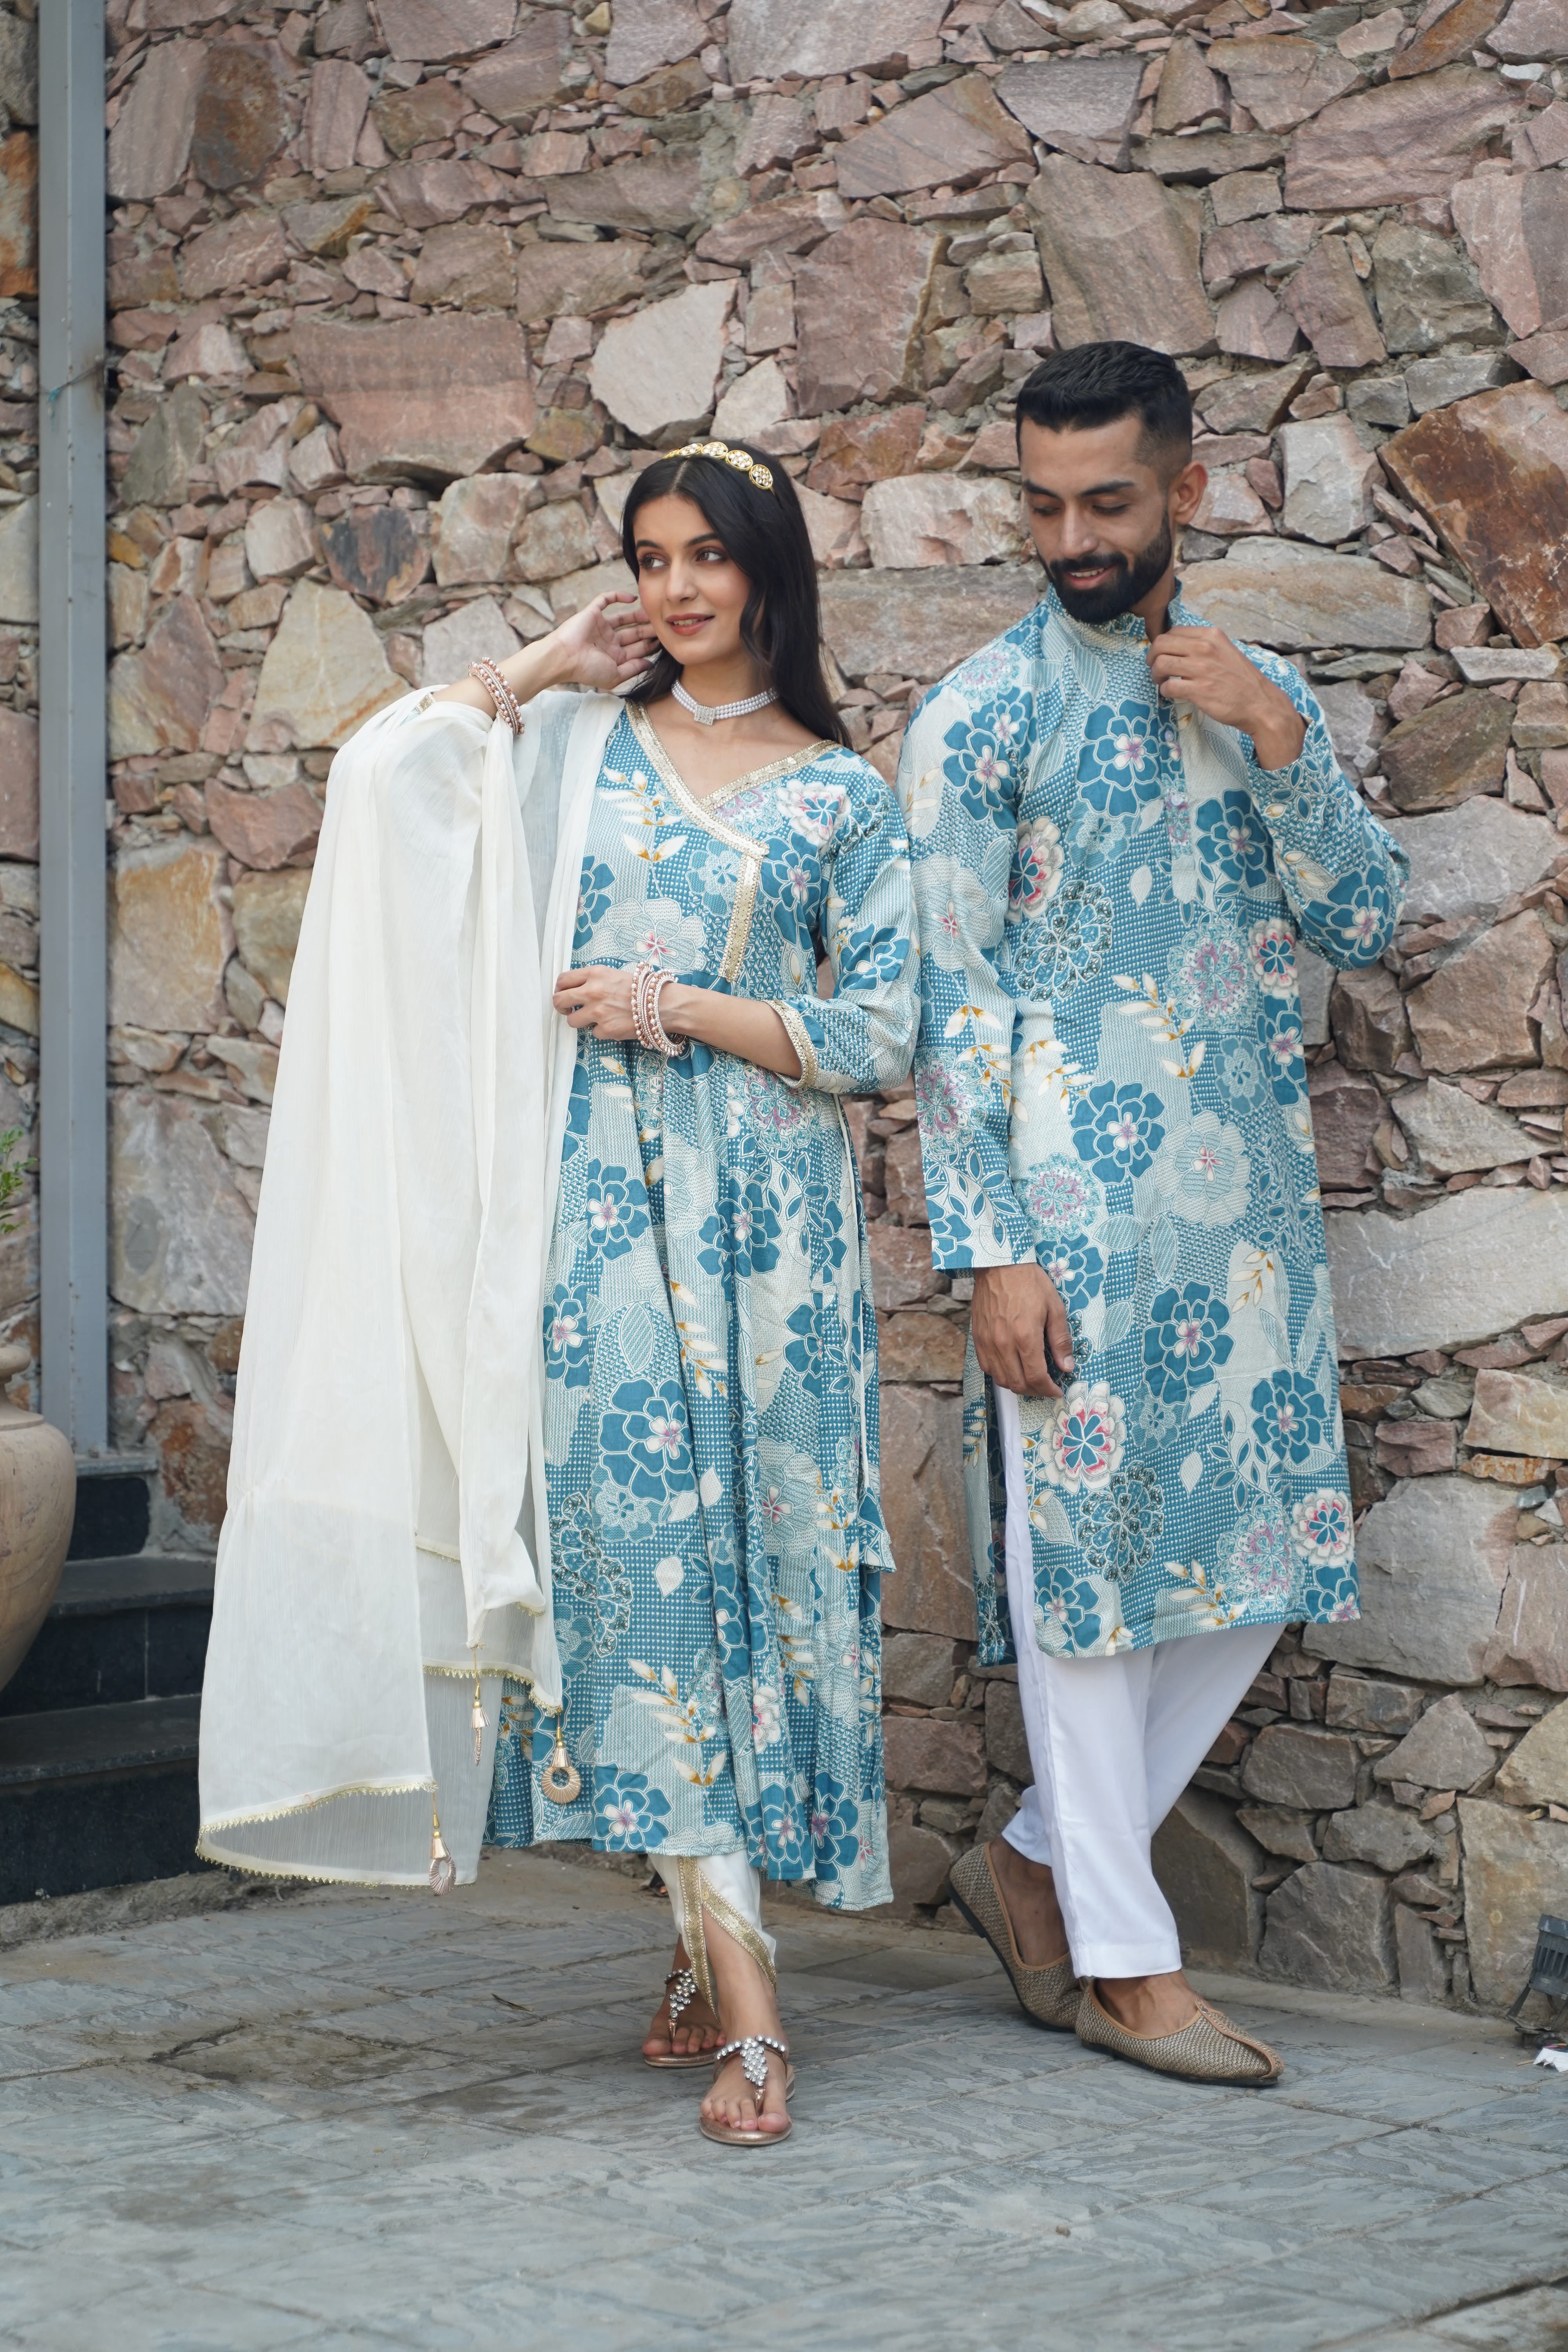 Buy Couple Matching Outfits, Matching Outfits Sky Color, Couple Formal  Outfit, Couple Honeymoon, Couple Outfit for Photoshoot, Sky Blue Dress  Online in India - Etsy